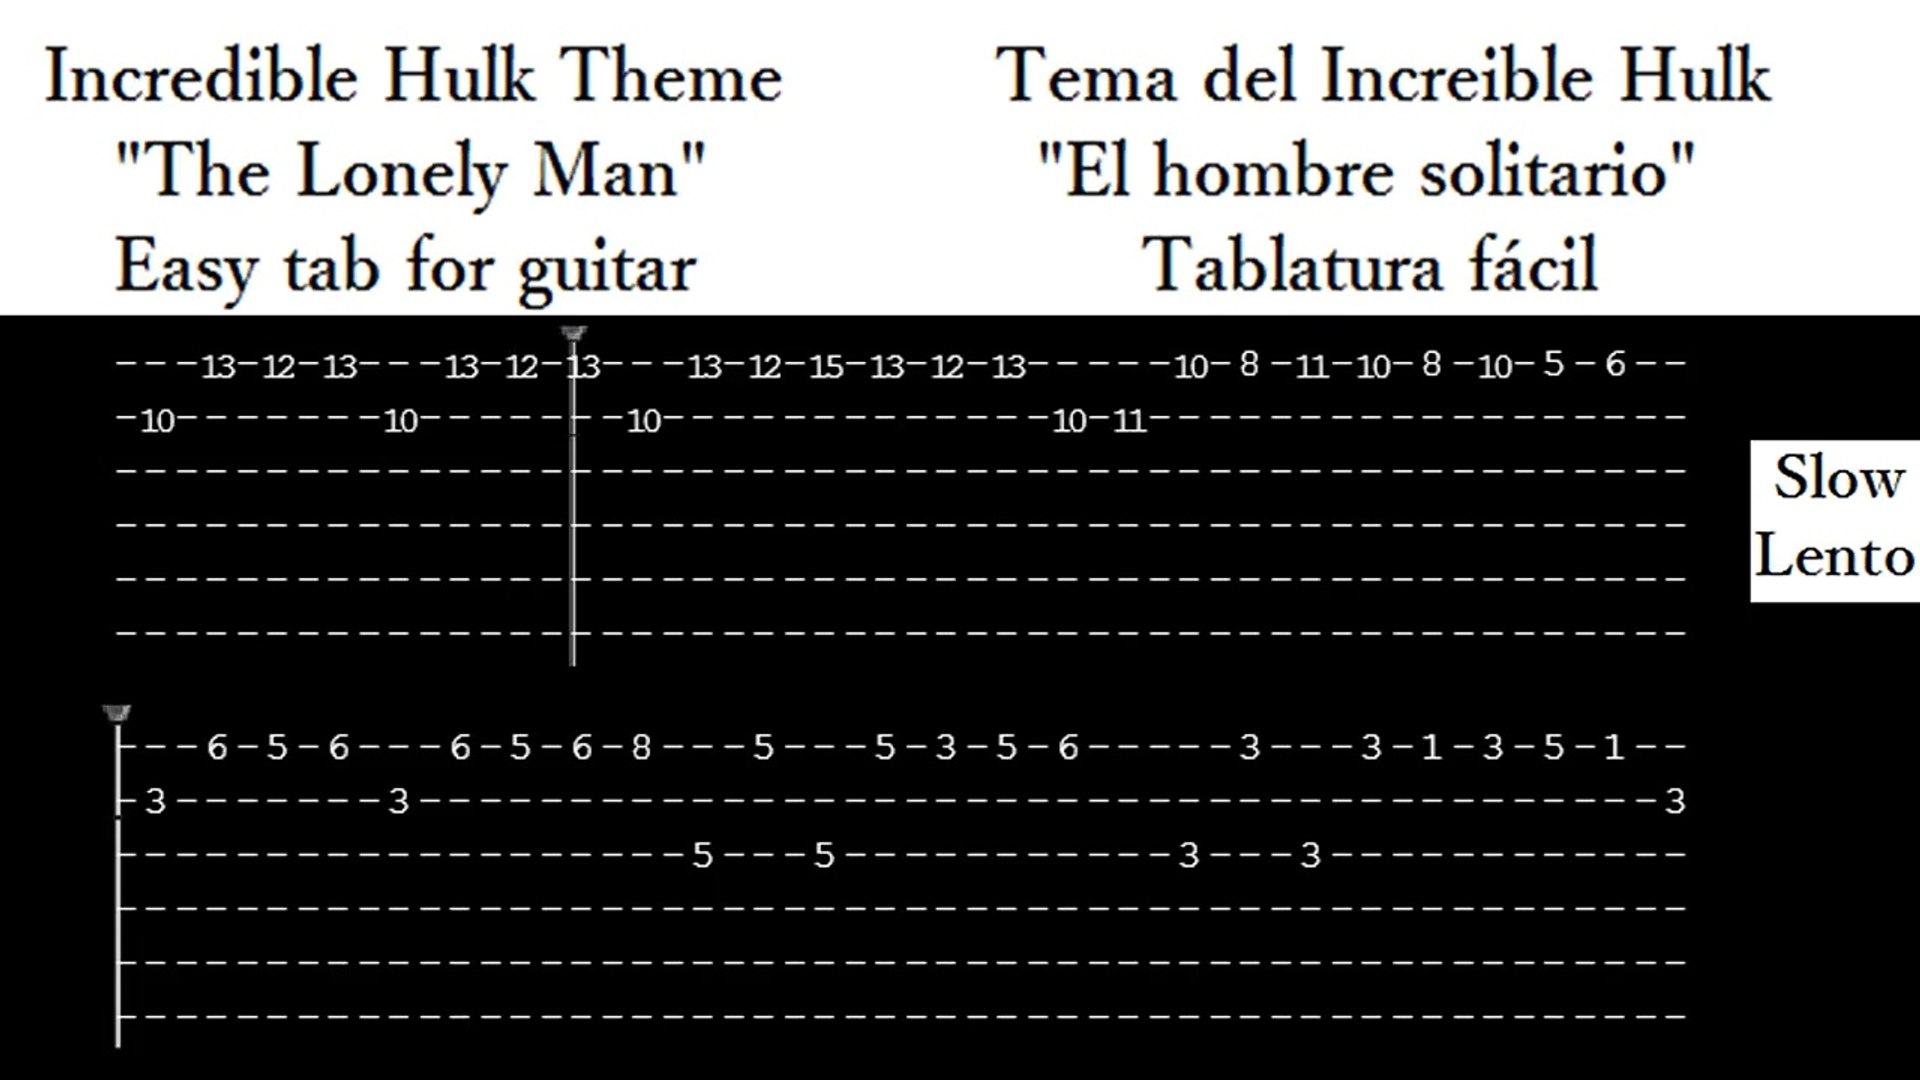 The Lonely Man The Incredible Hulk Theme Guitar Tab Easy Video Dailymotion